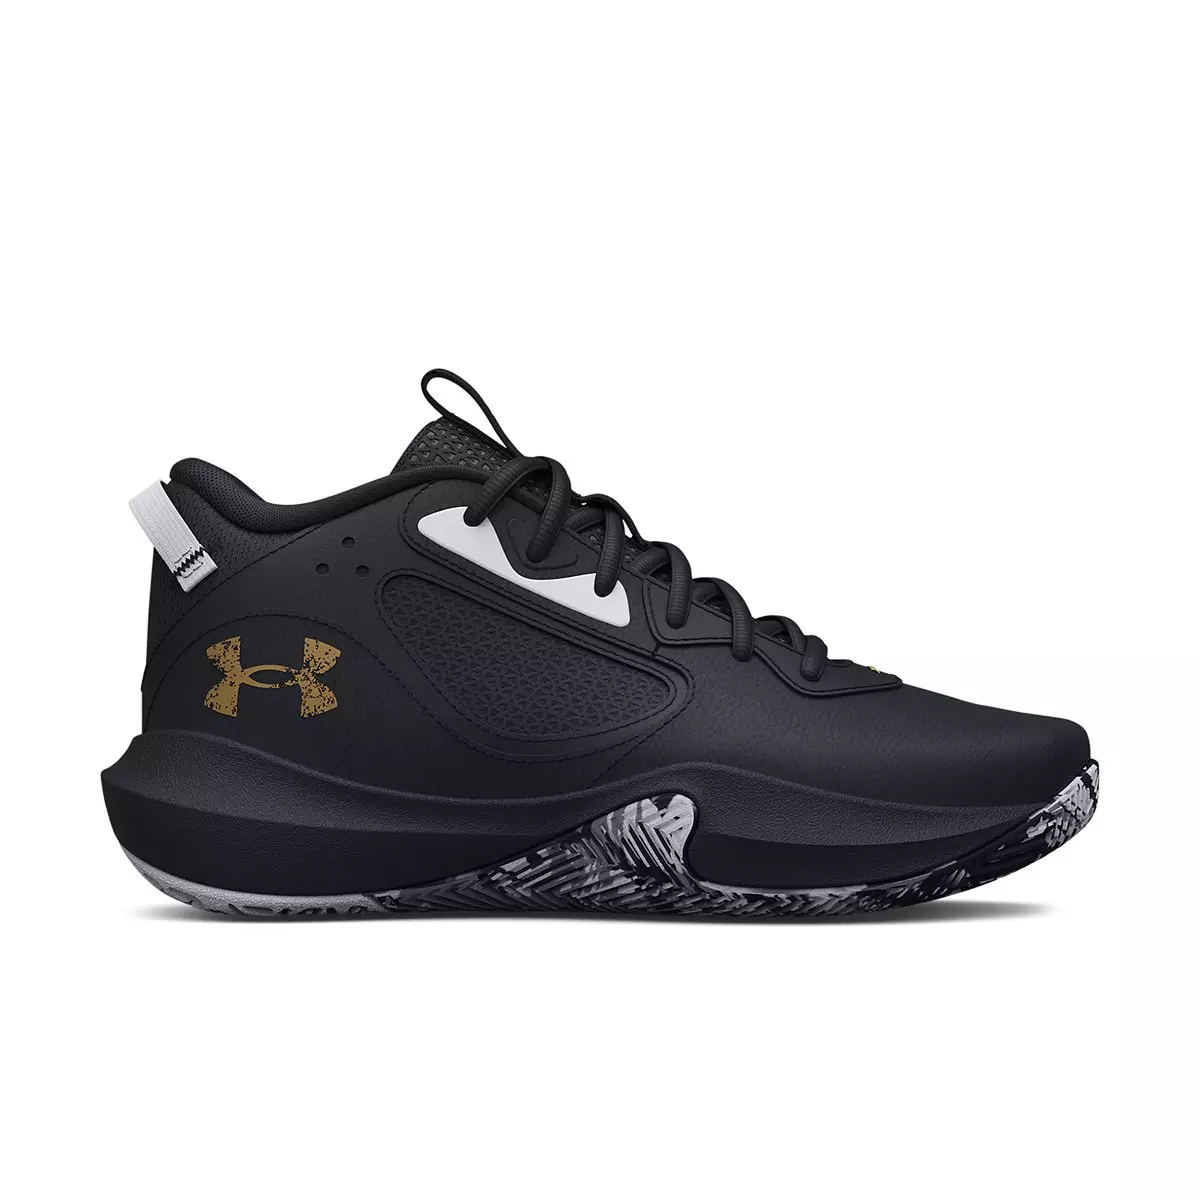 Under Armour Lockdown 6 Basketball Shoes - Black/Gold